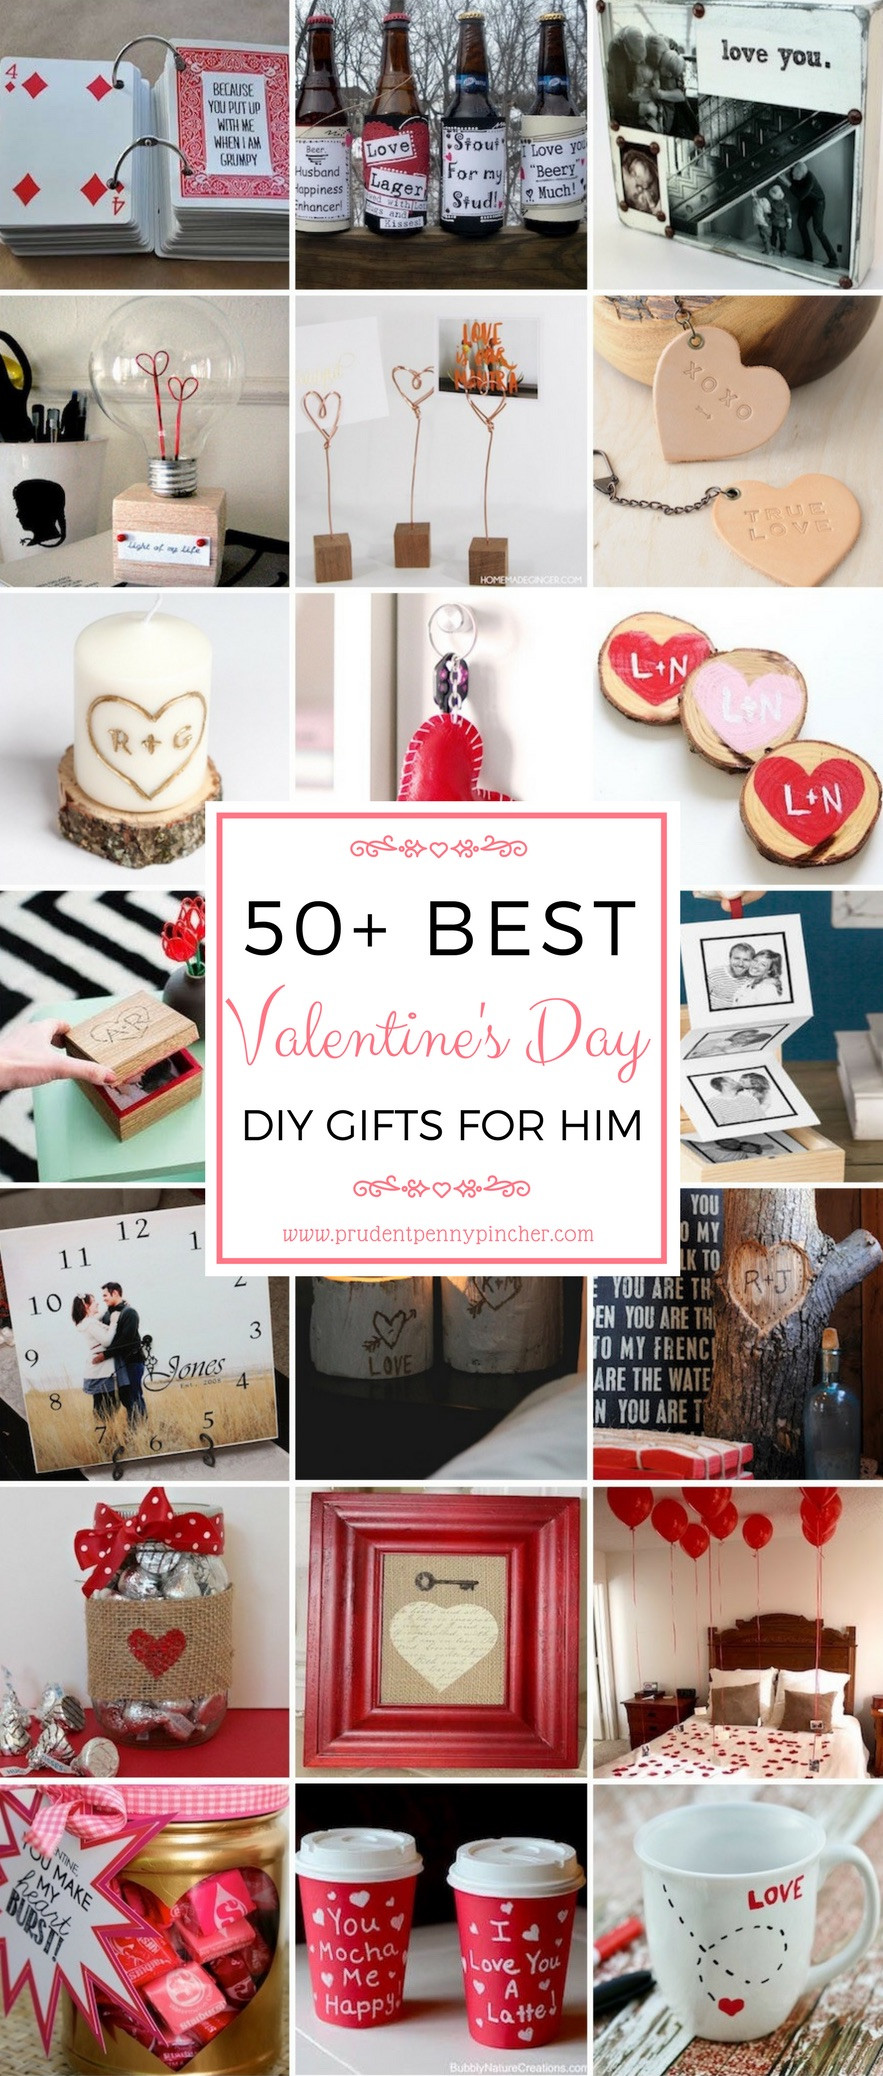 Cheap Valentines Day Gifts For Him
 Cheap Valentine s Day Gift Ideas For Him 39 Personalized